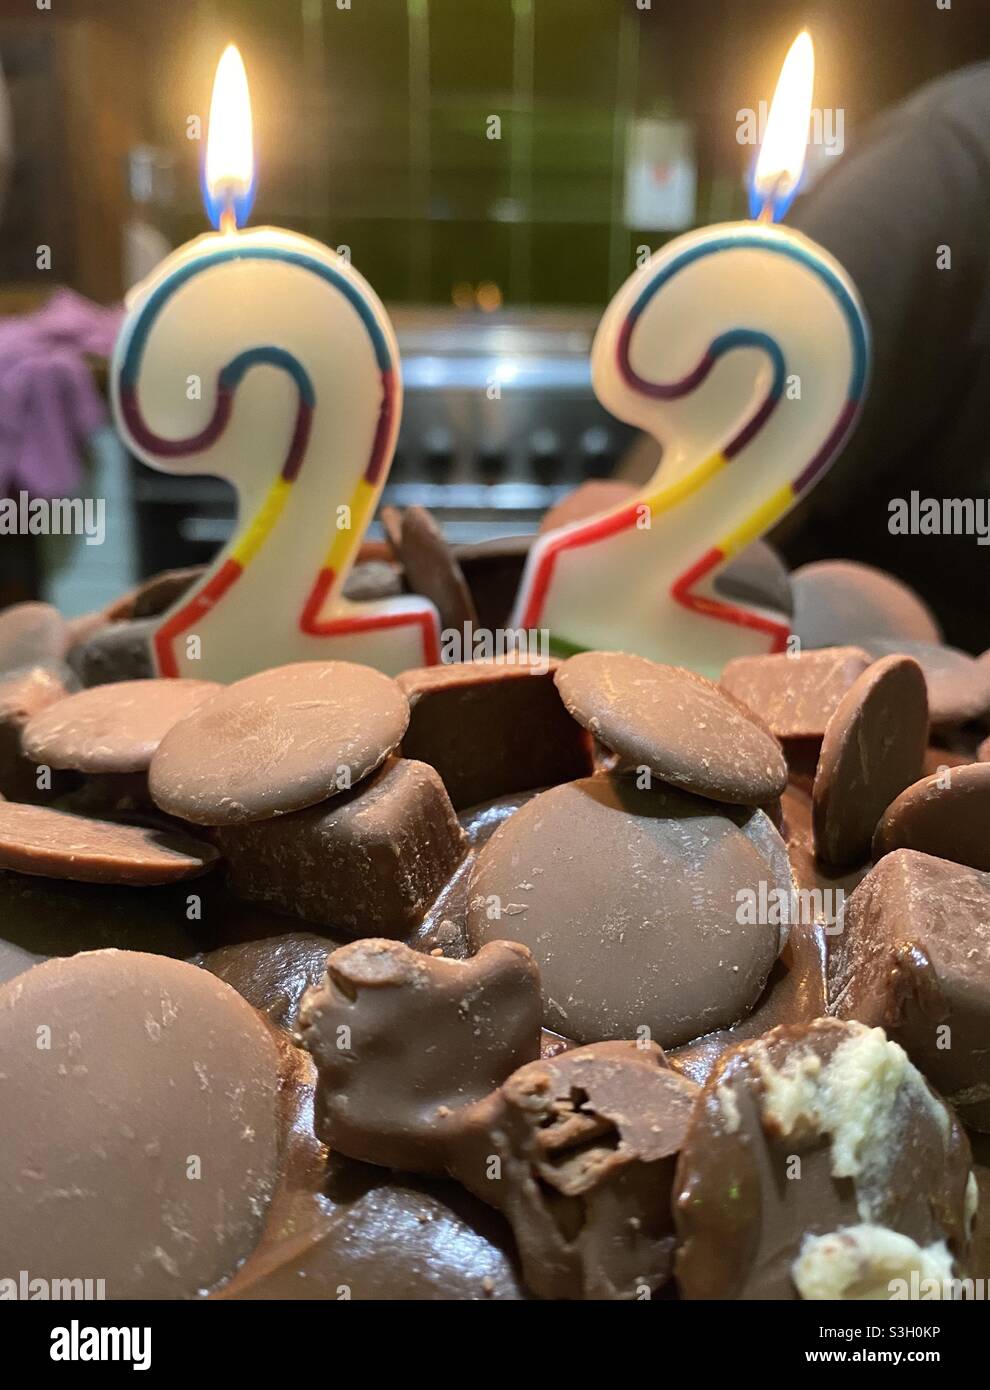 Chocolate loaded birthday cake with 22 candles Stock Photo - Alamy